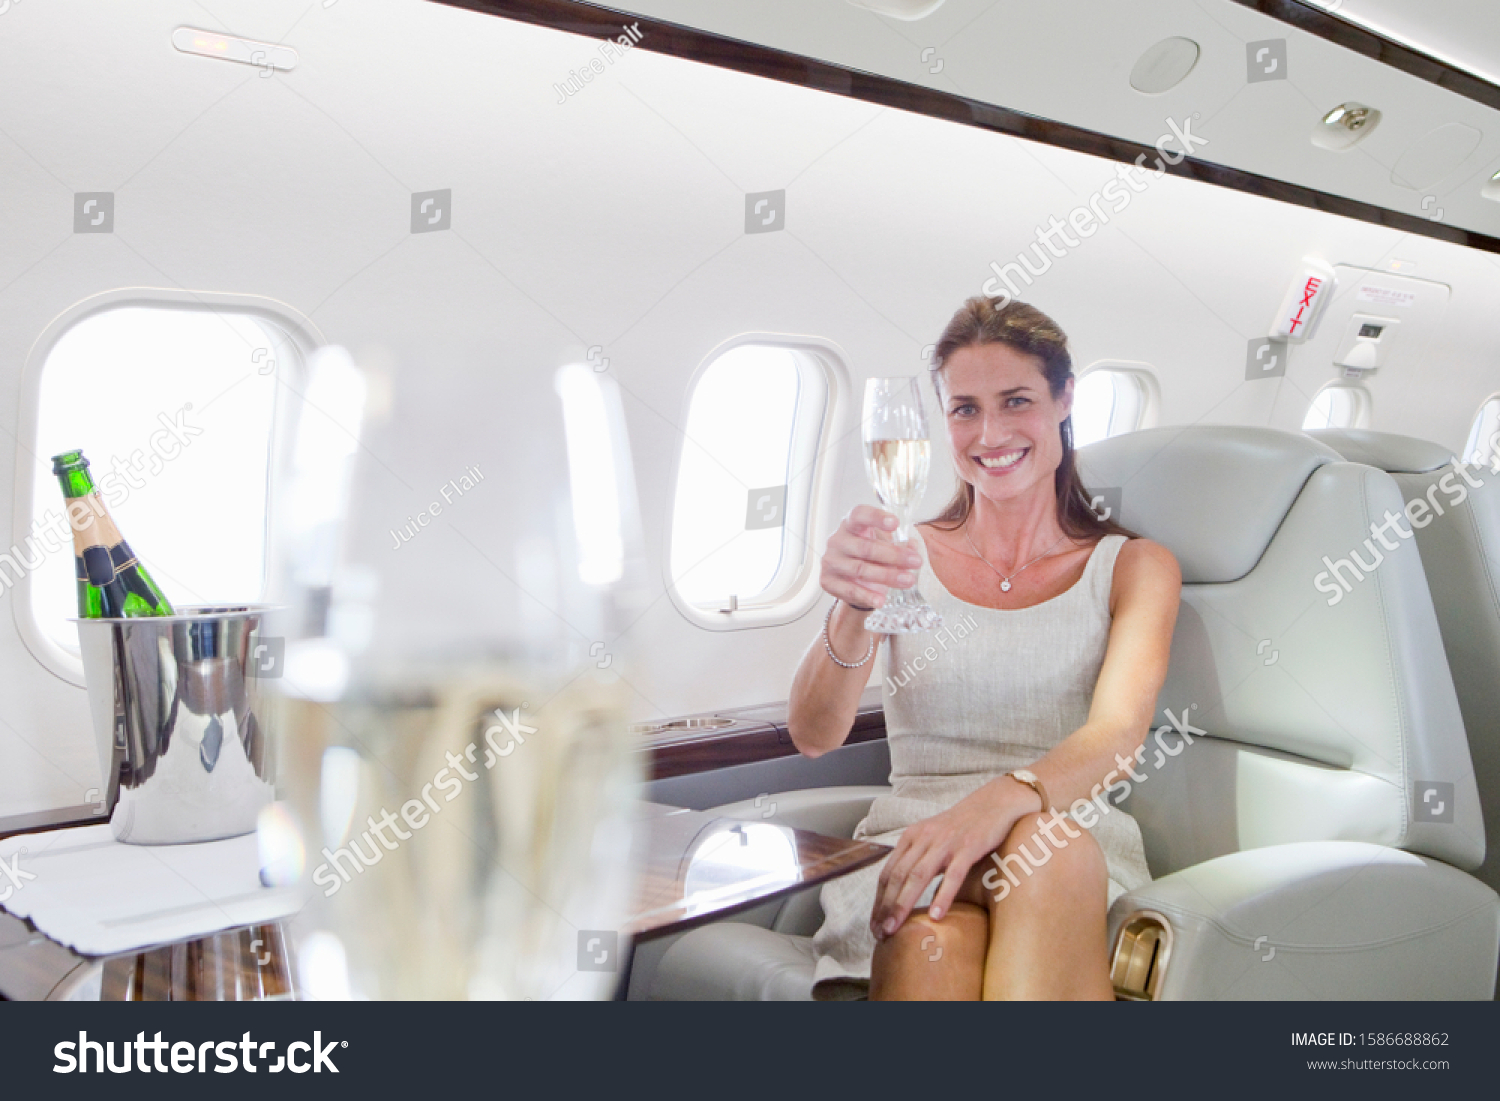 Attractive woman sitting and holding champagne glass in private jet #1586688862